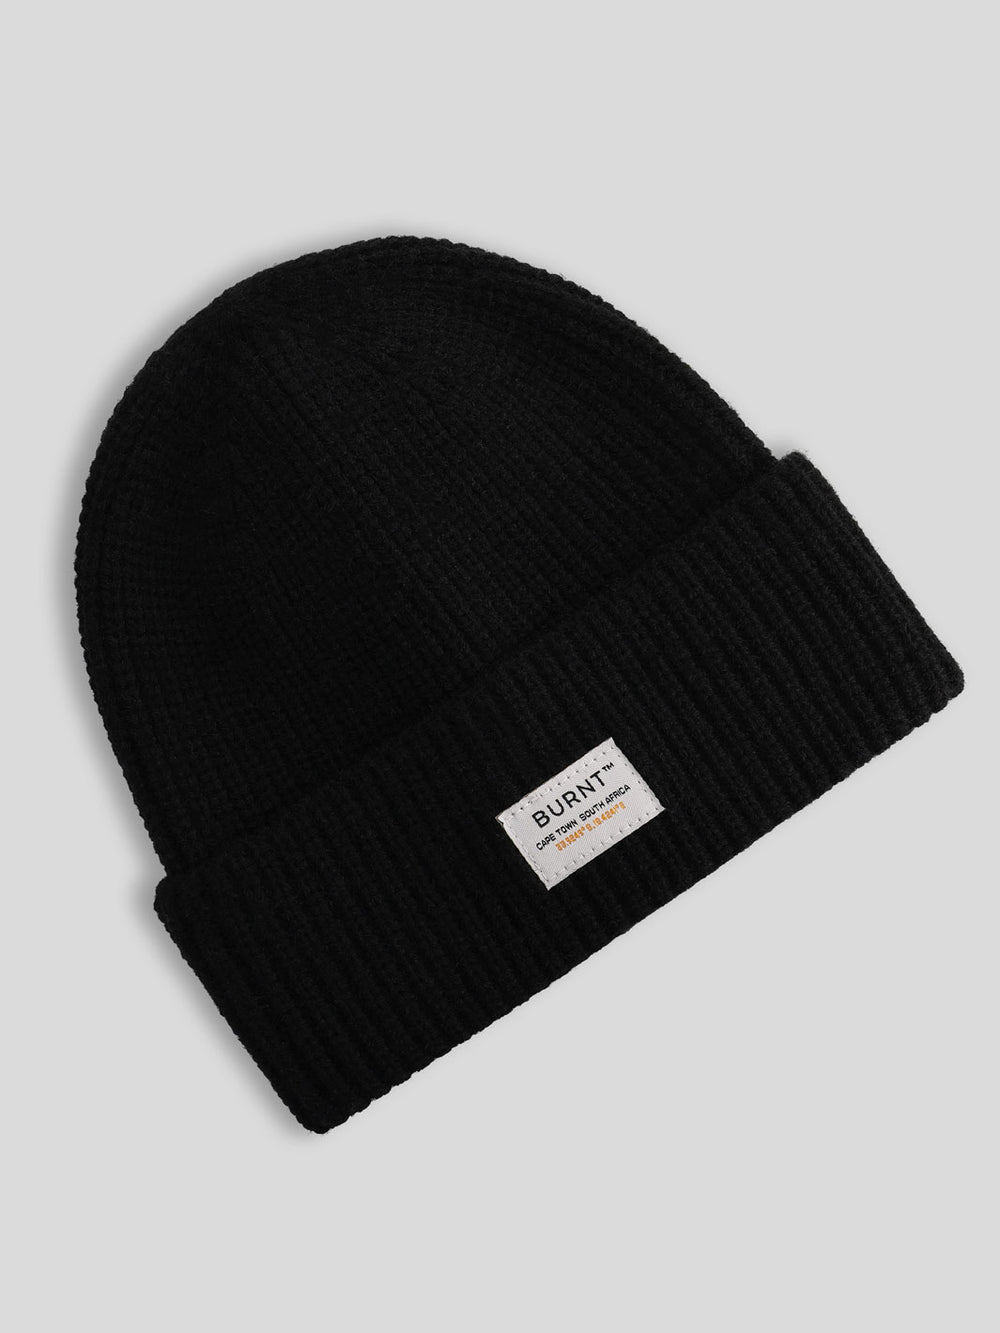 Moscow Beanie in black - front view